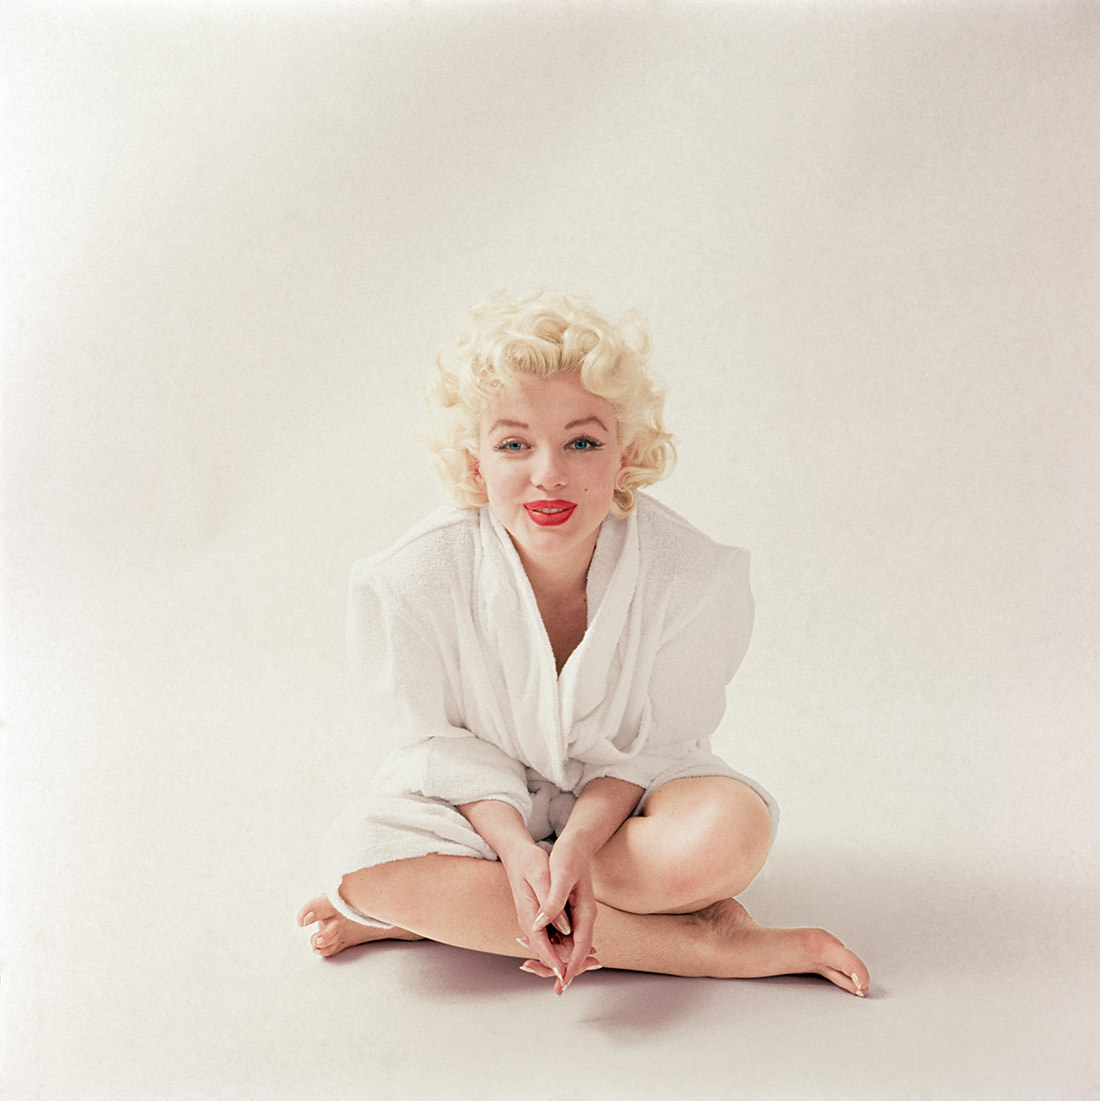 Monroe wears her favorite outfit, a white terrycloth robe, just after finishing her makeup in March 1955.